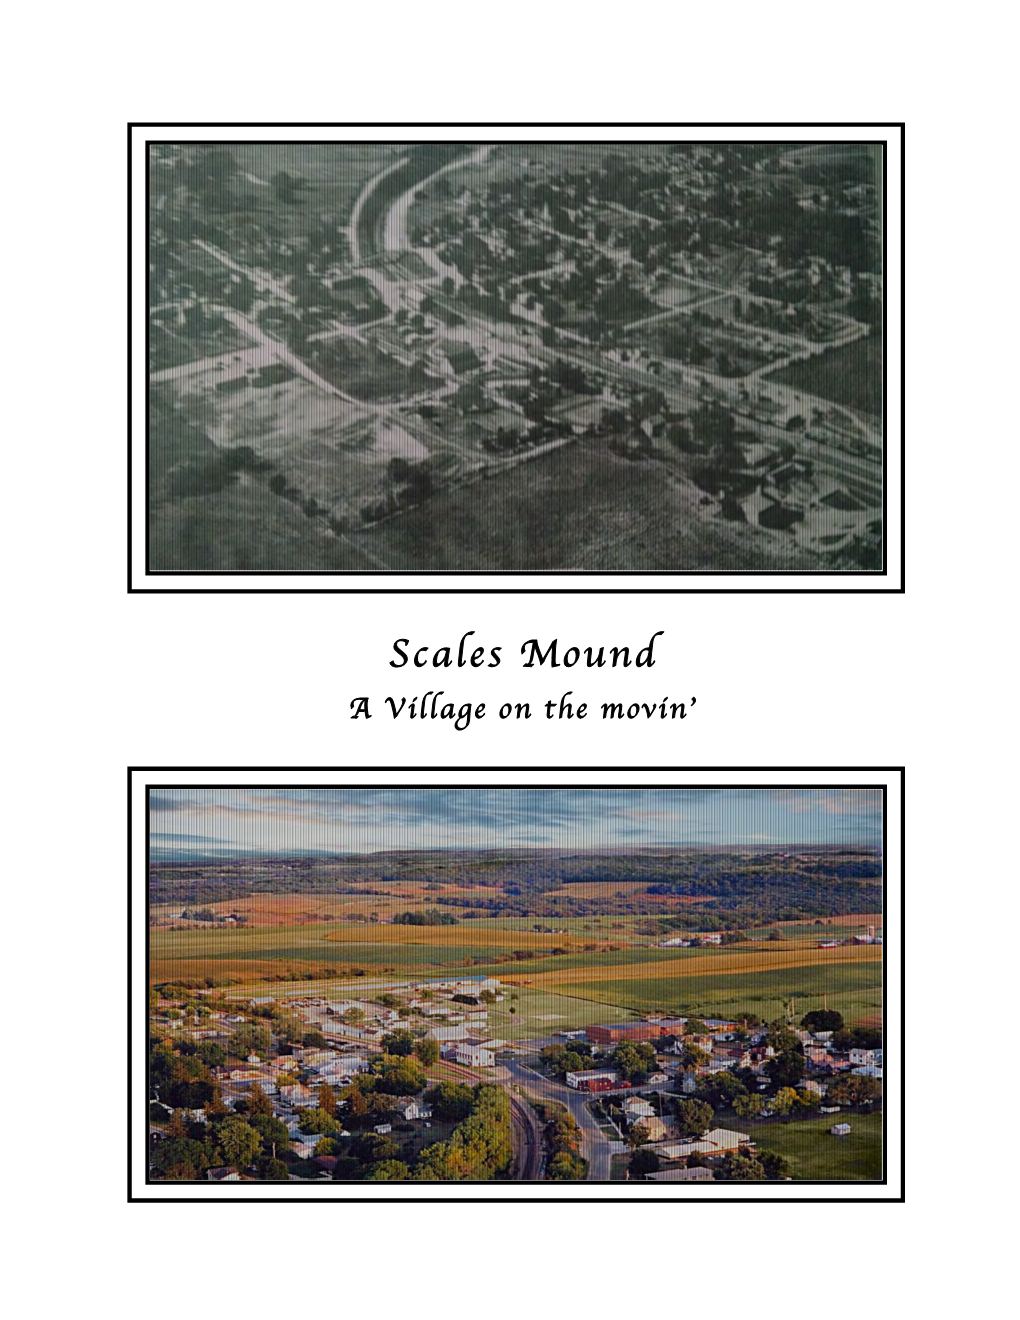 Village of Scales Mound Was Incorporated June 9, 1877, Being the Fifth of the Cities Or Villages in the County to Become Incorporated